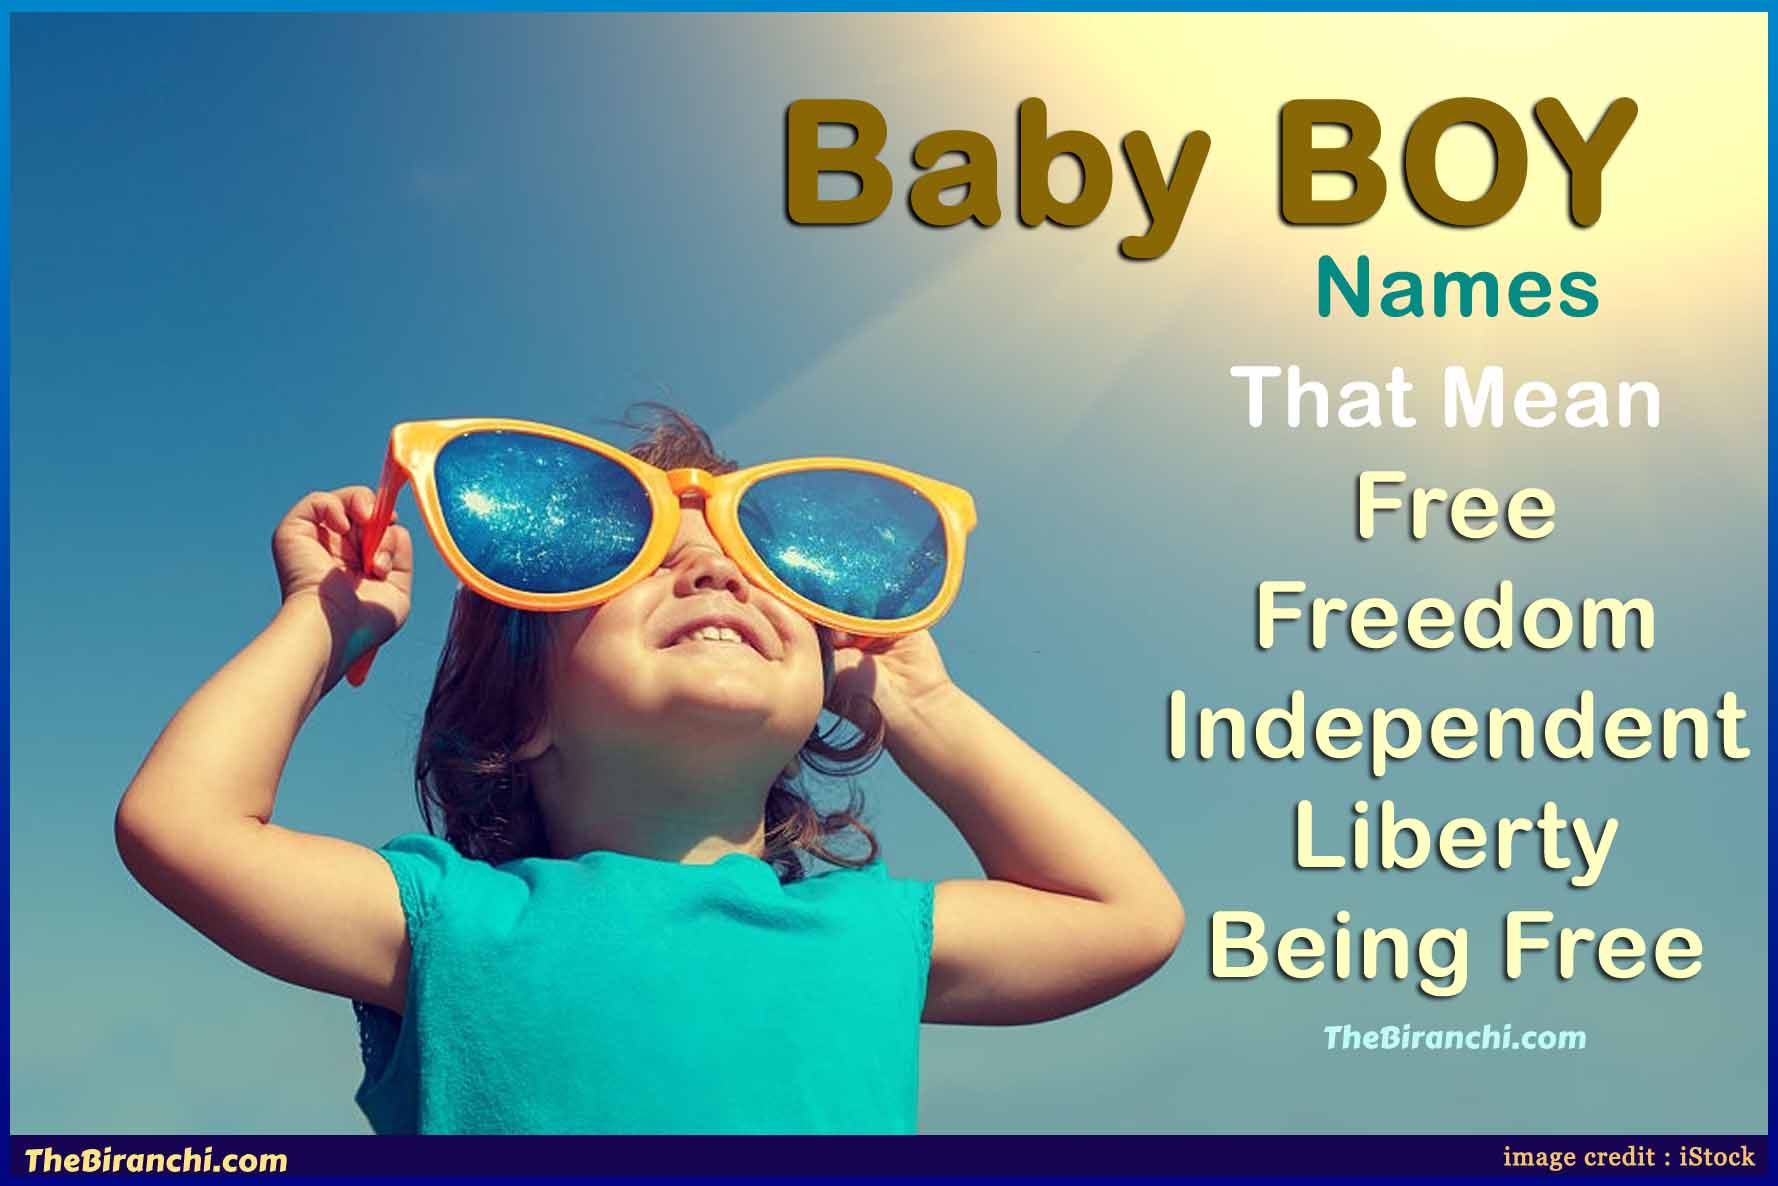 Unique-Baby-Boy-Names-That-Mean-Freedom-or-Being-Free-1